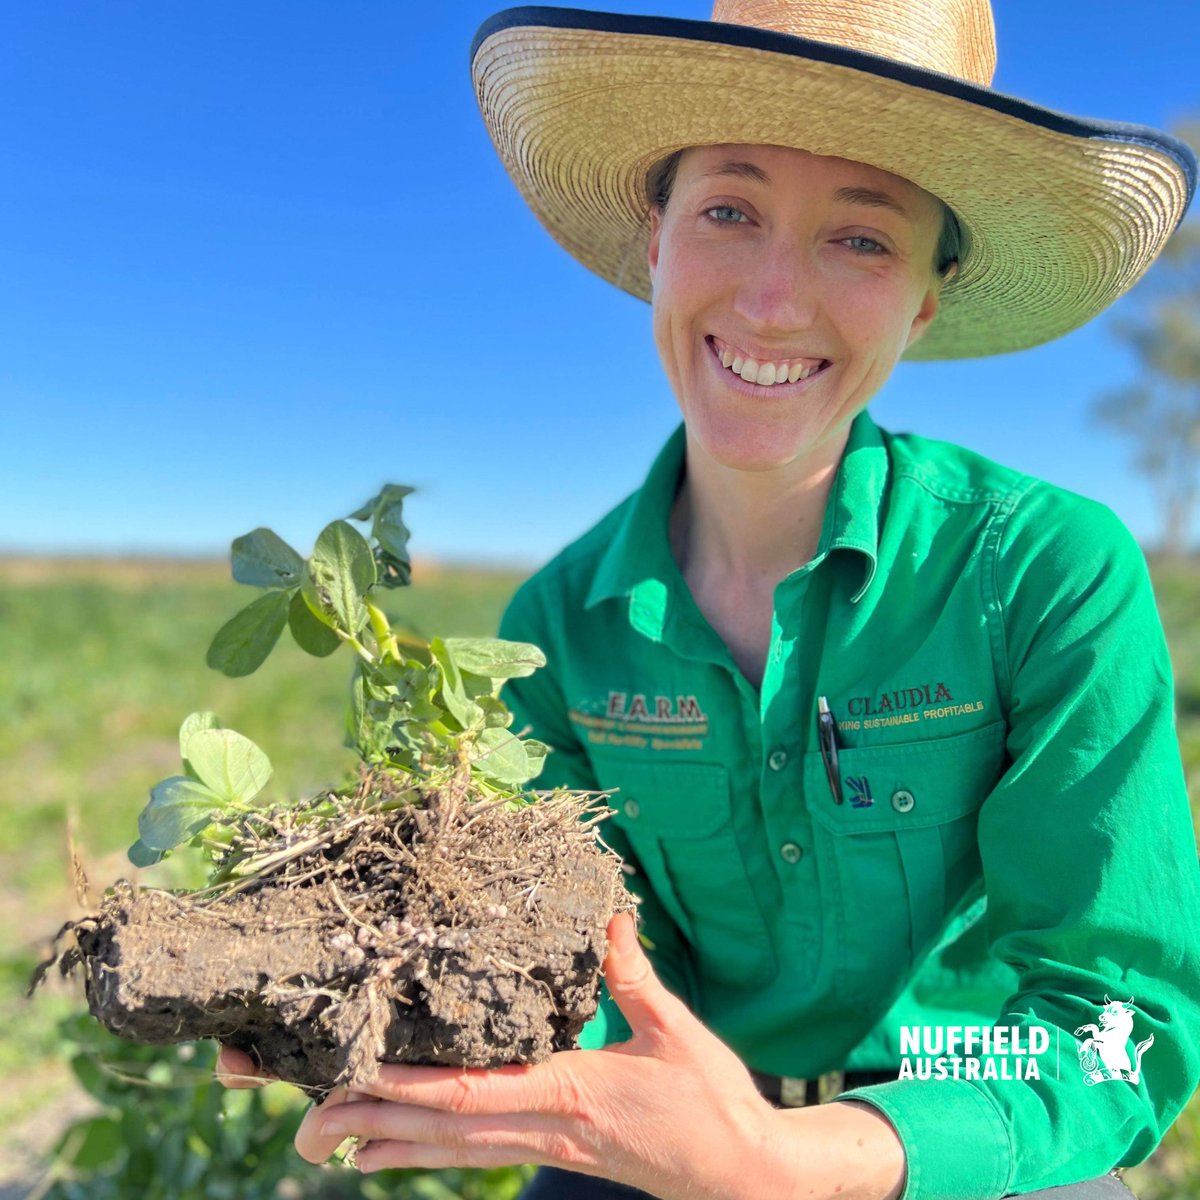 Join us on 12 May for the global call to action on this #PlantHealthDay!
Together, let's protect plant health and ensure a sustainable future for all. 🌿 
#NuffieldAustralia #InternationalPlantHealthDay #SustainableAgriculture